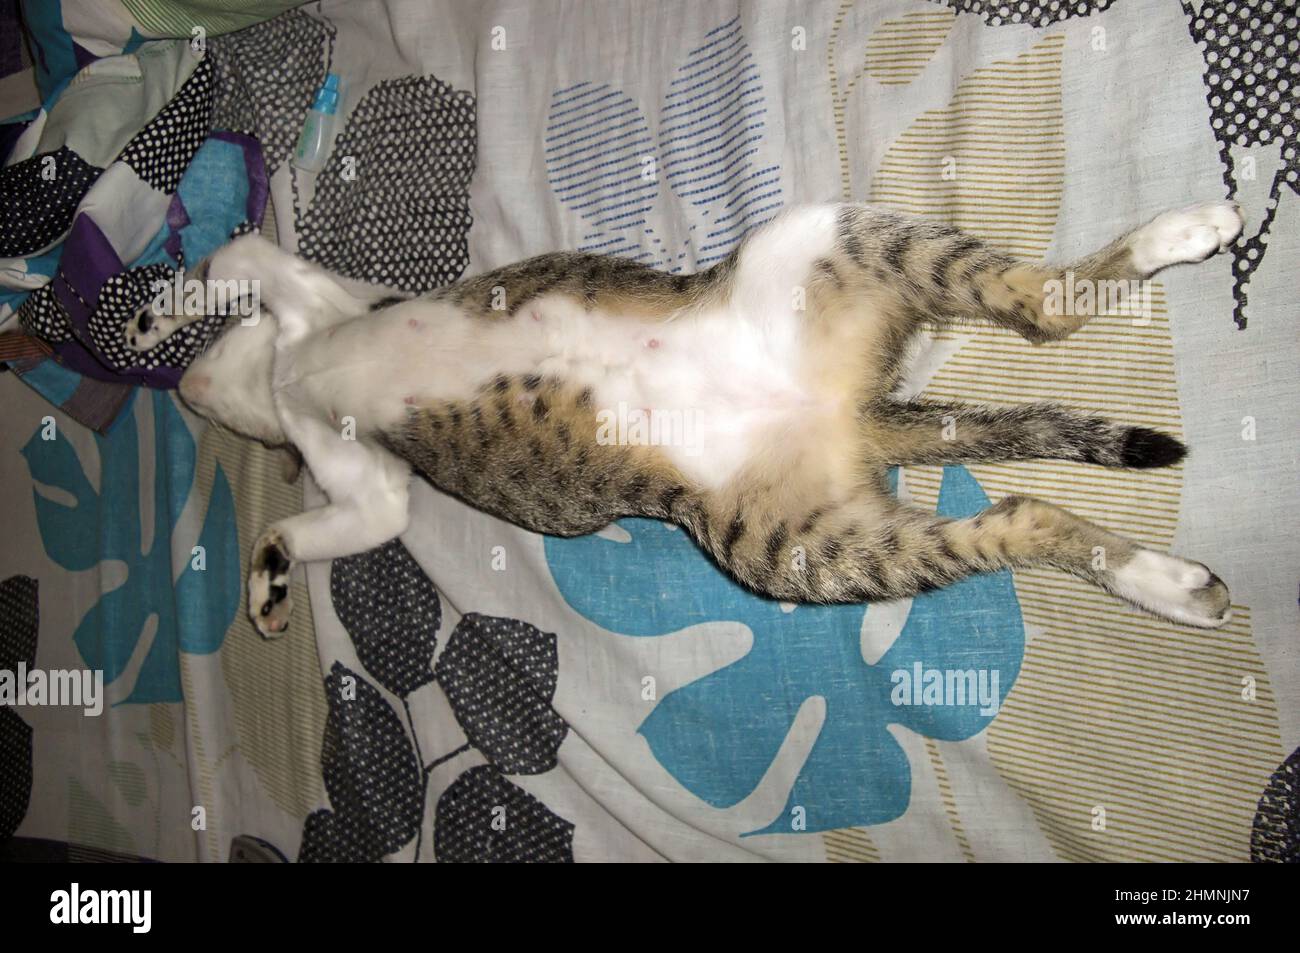 Funny cat is sleeping in a curious position on a bed on the Philippines December 15, 2011 Stock Photo